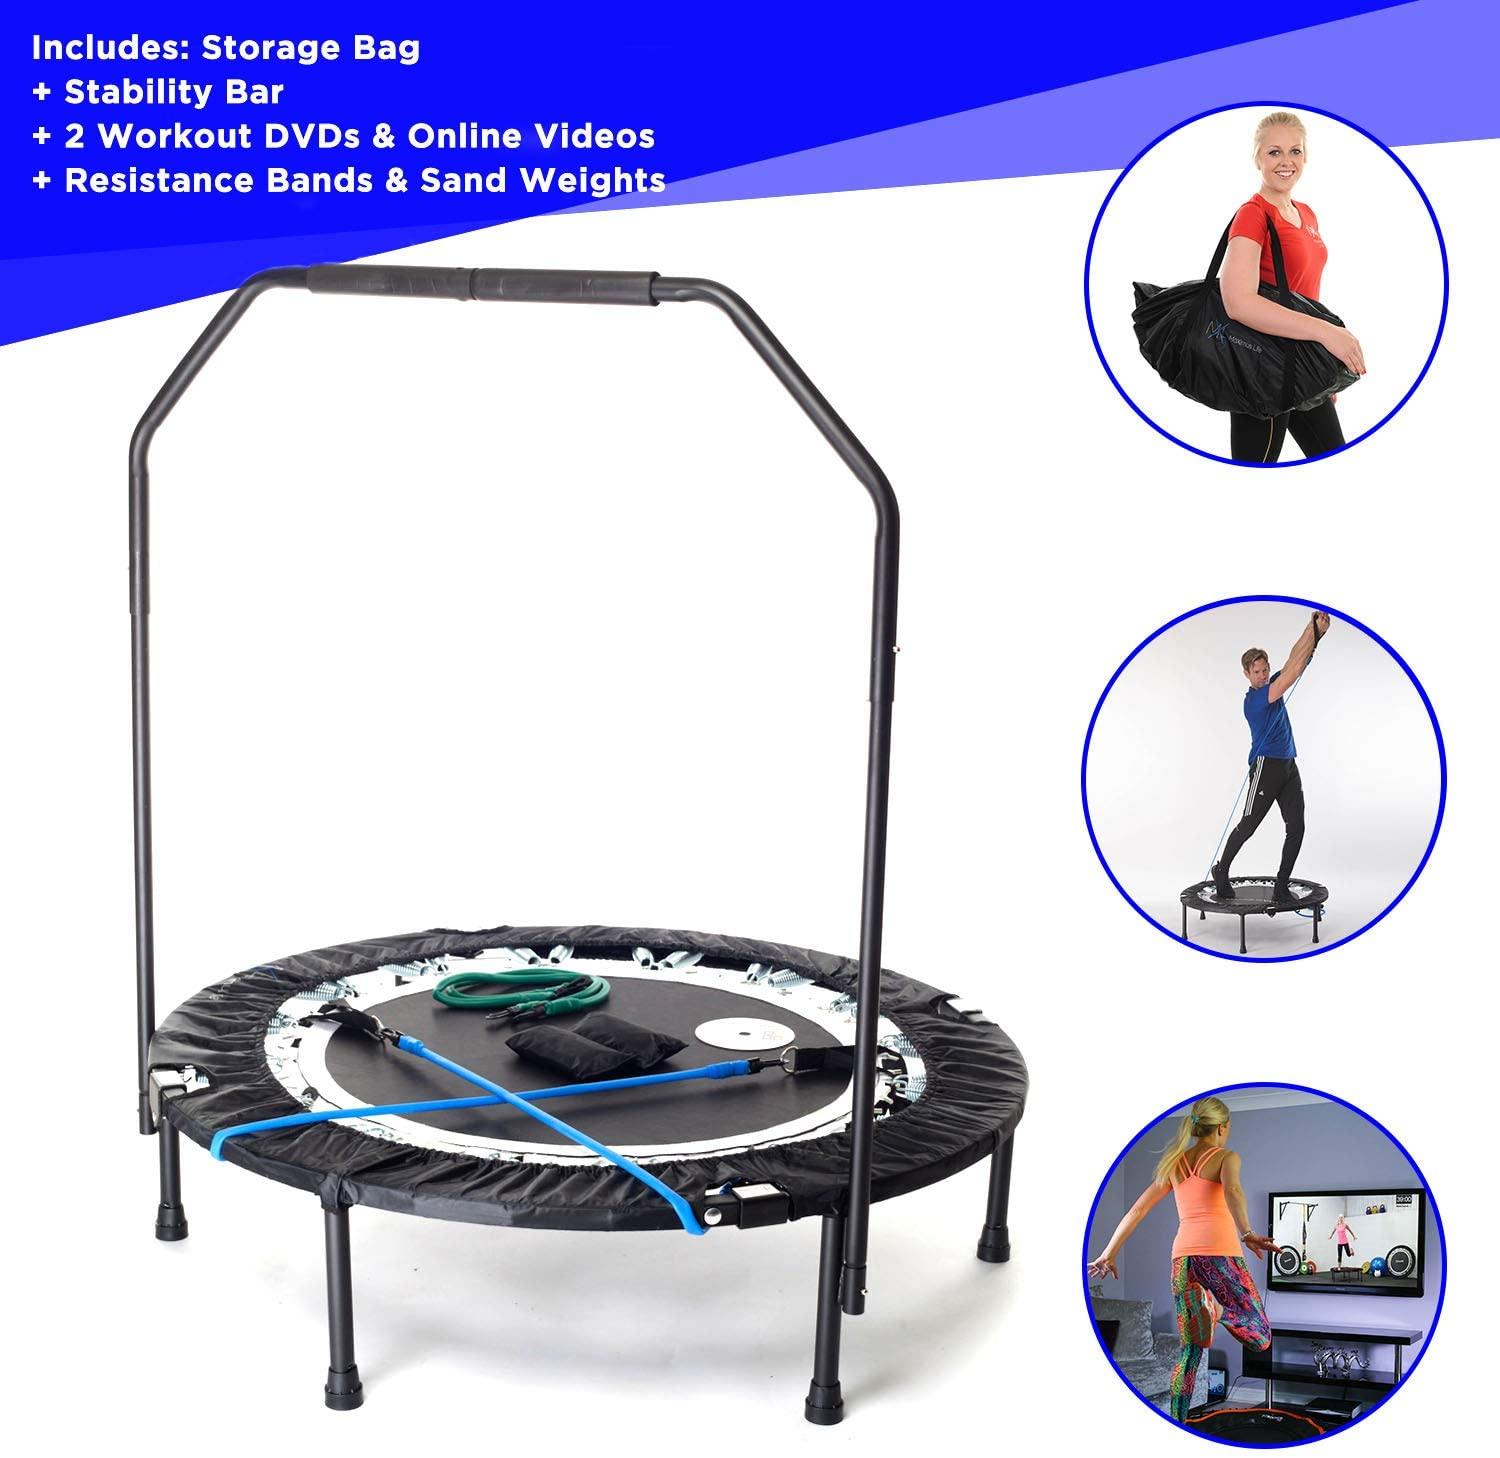 Easy Transport Folding Fitness Trampoline 4 Music Workout Videos Incl. No-Tip Arched Legs In-Home Rebounder Safe & Stable Bounce for Quality & Durability JumpSport 350F 